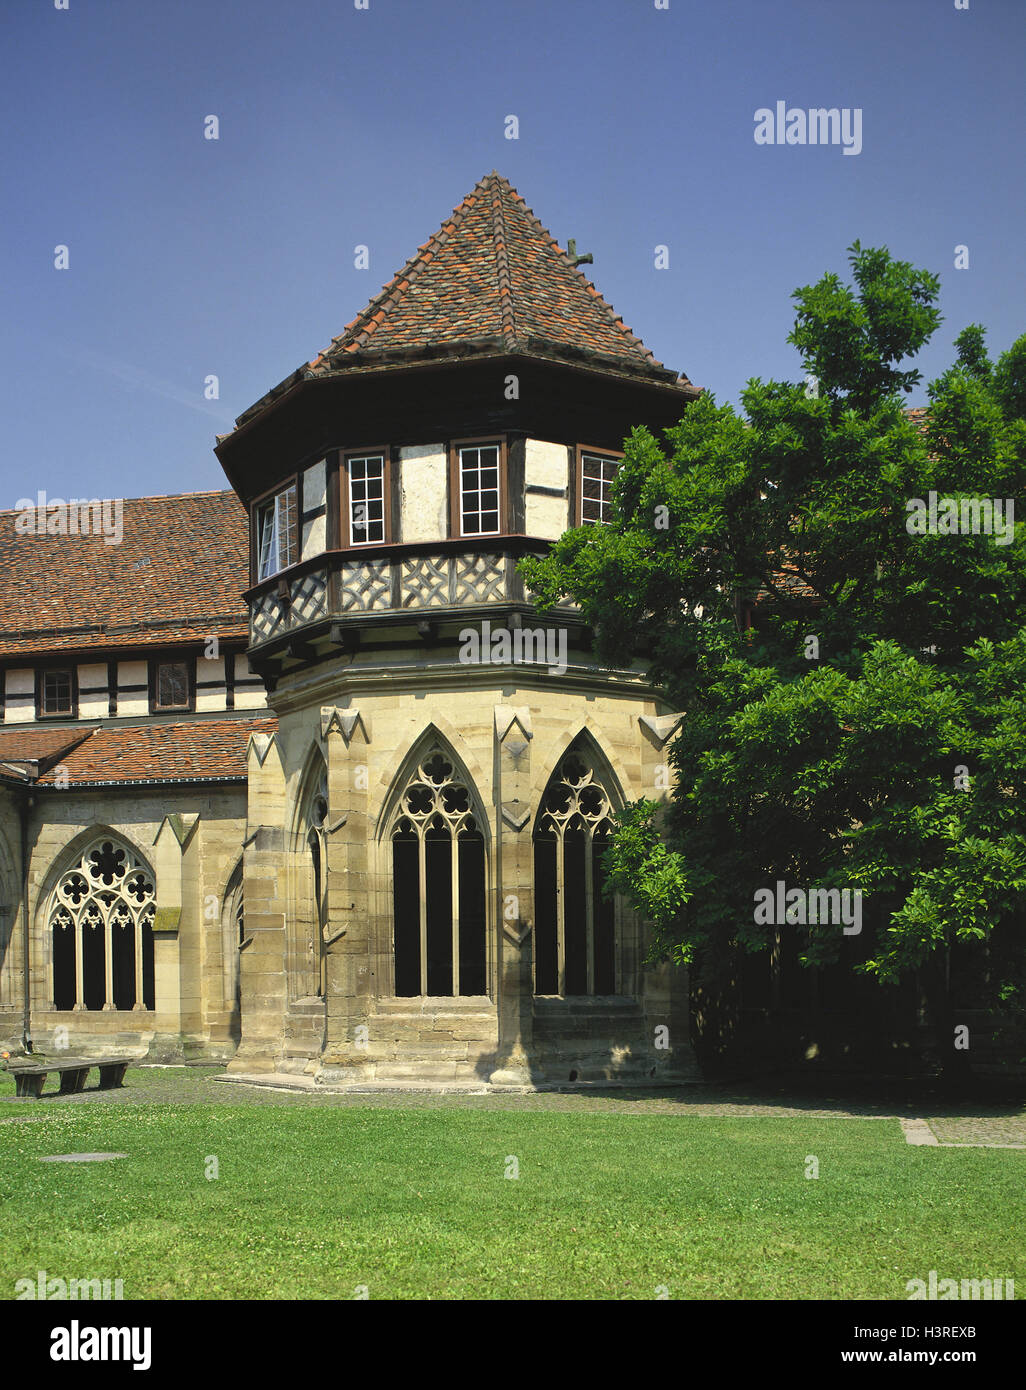 Germany, Baden-Wurttemberg, Maulbronn, cloister, well band, cloister, Europe, Central, Europe, Black Forest, place of interest, landmark, UNESCO-world cultural heritage, Cistercian's abbey, abbey, Cistercian monastery, founded in 1147, medievally, structure, architecture, architecture, pump room, outside, summer, Stock Photo